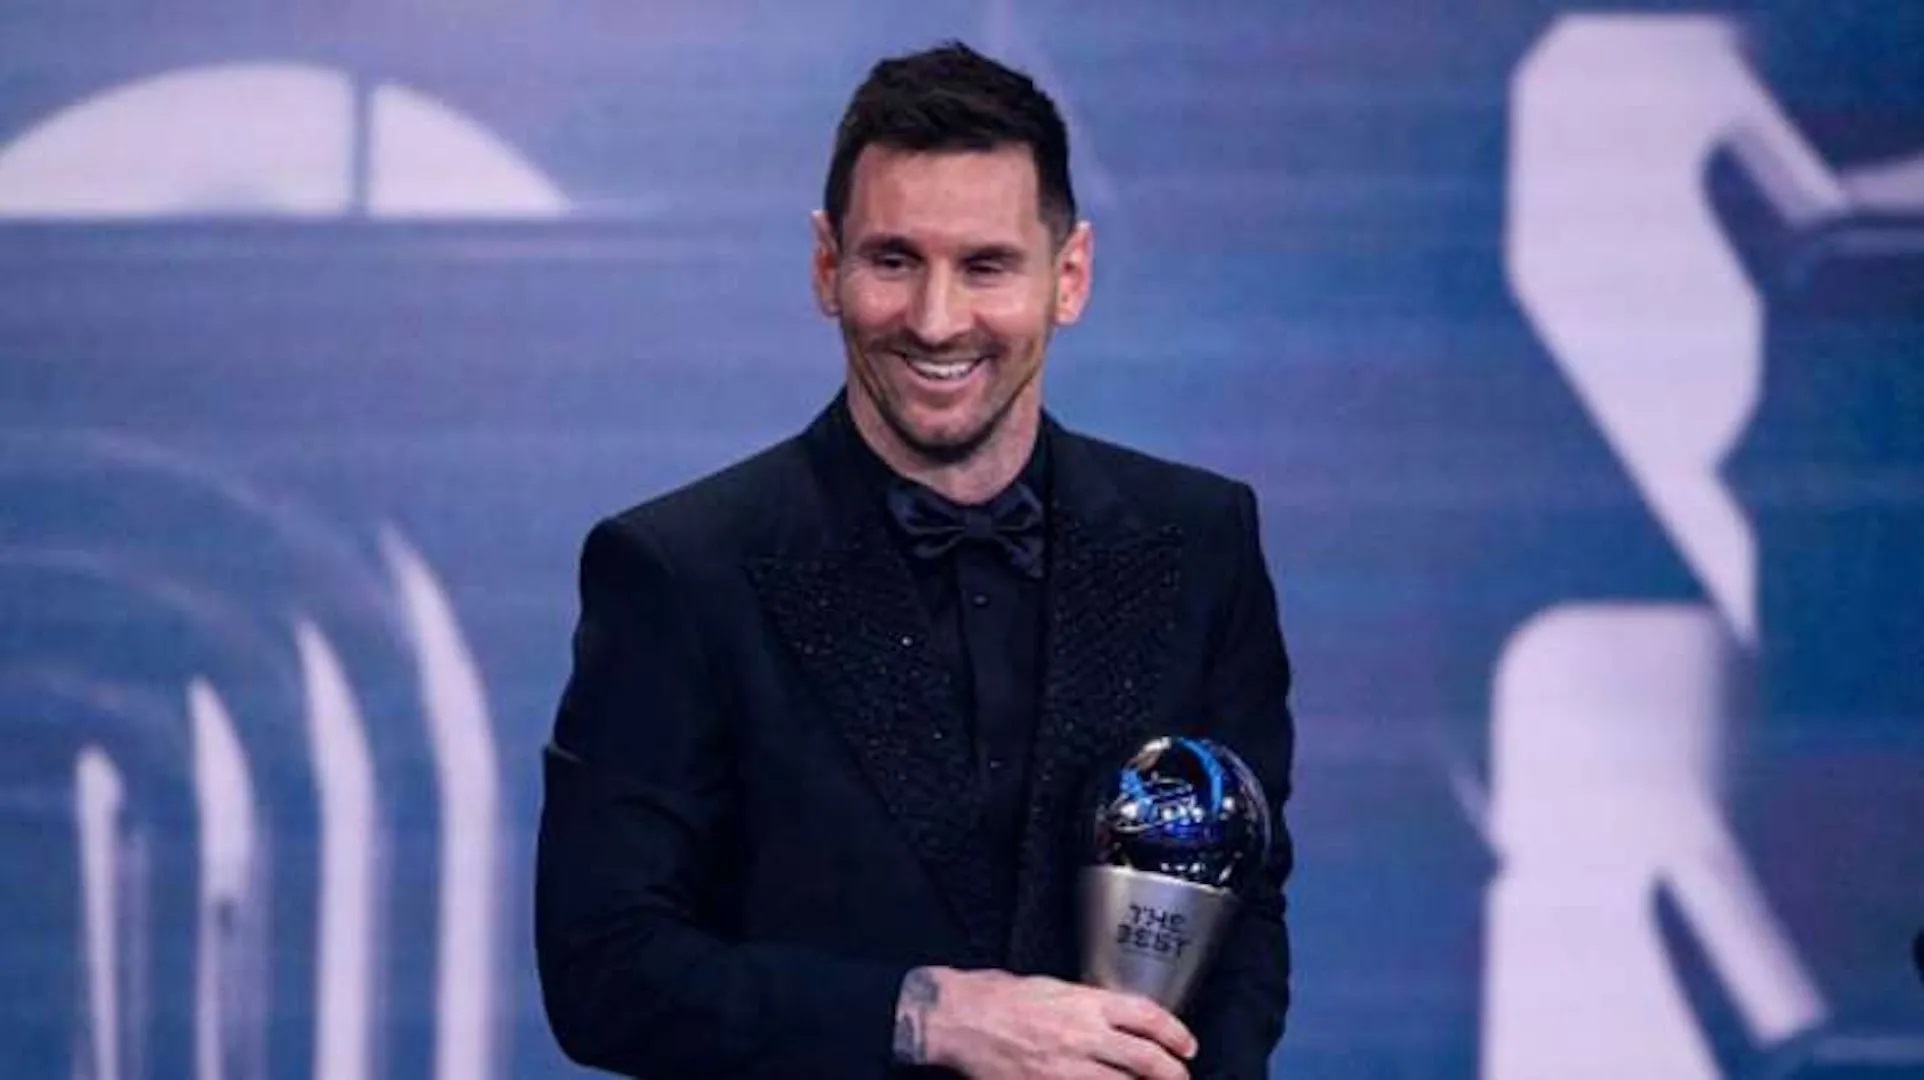 Lionel Messi wins FIFA award for best player over Kylian Mbappe